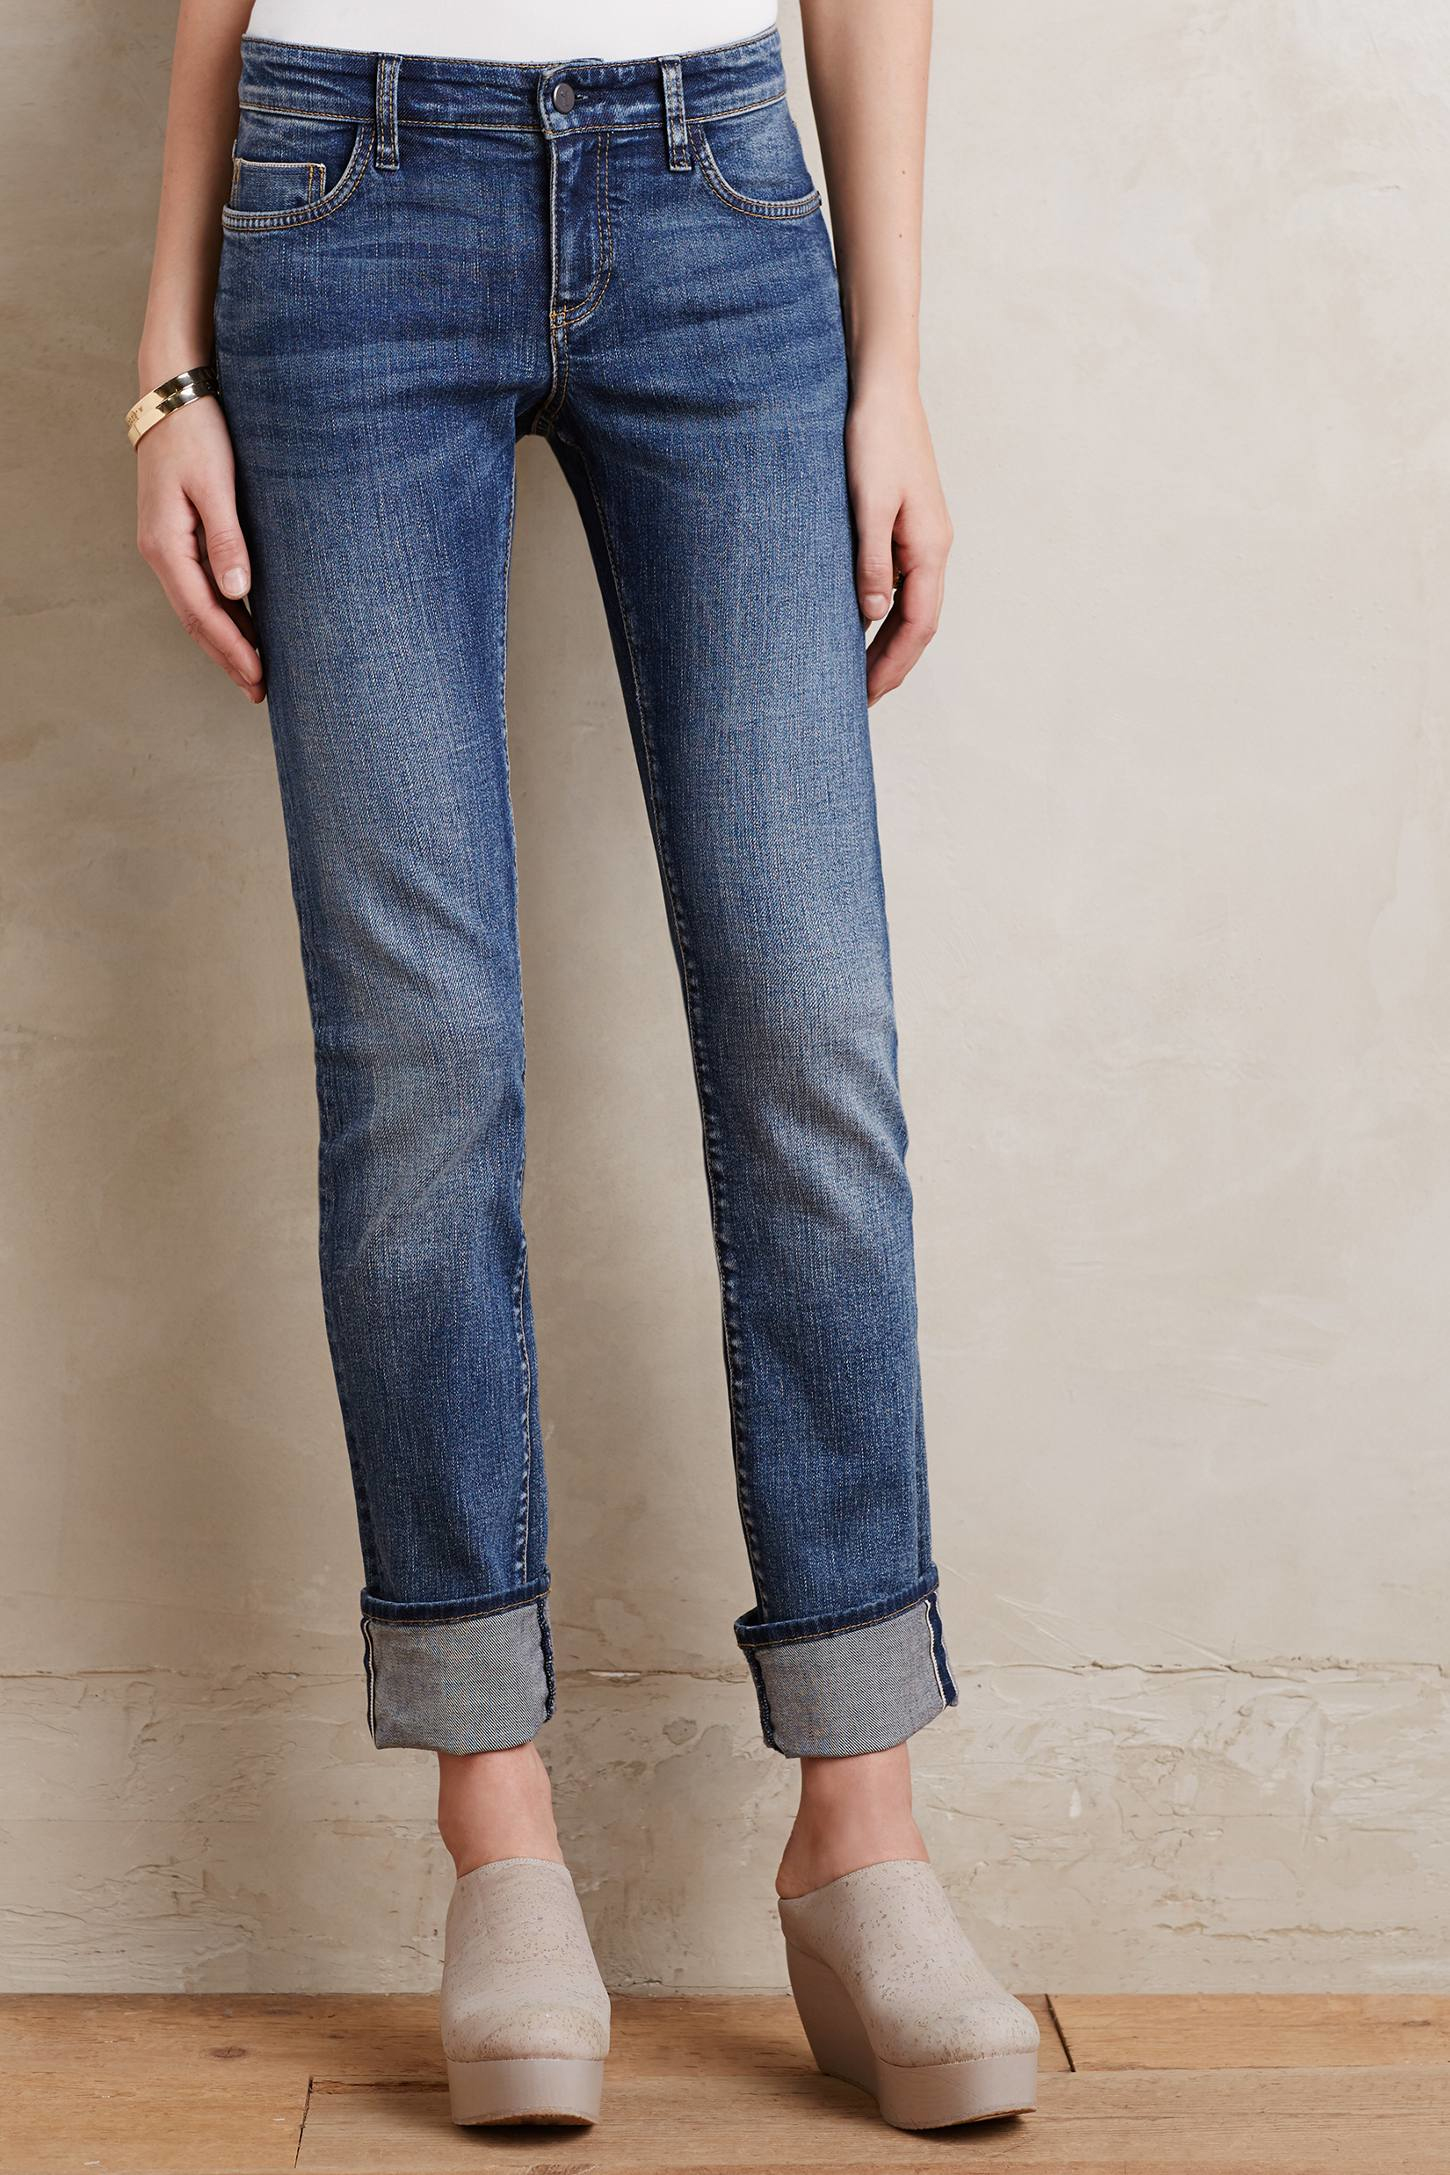 Lyst - Pilcro Parallel Selvage Mid-rise Jeans in Blue